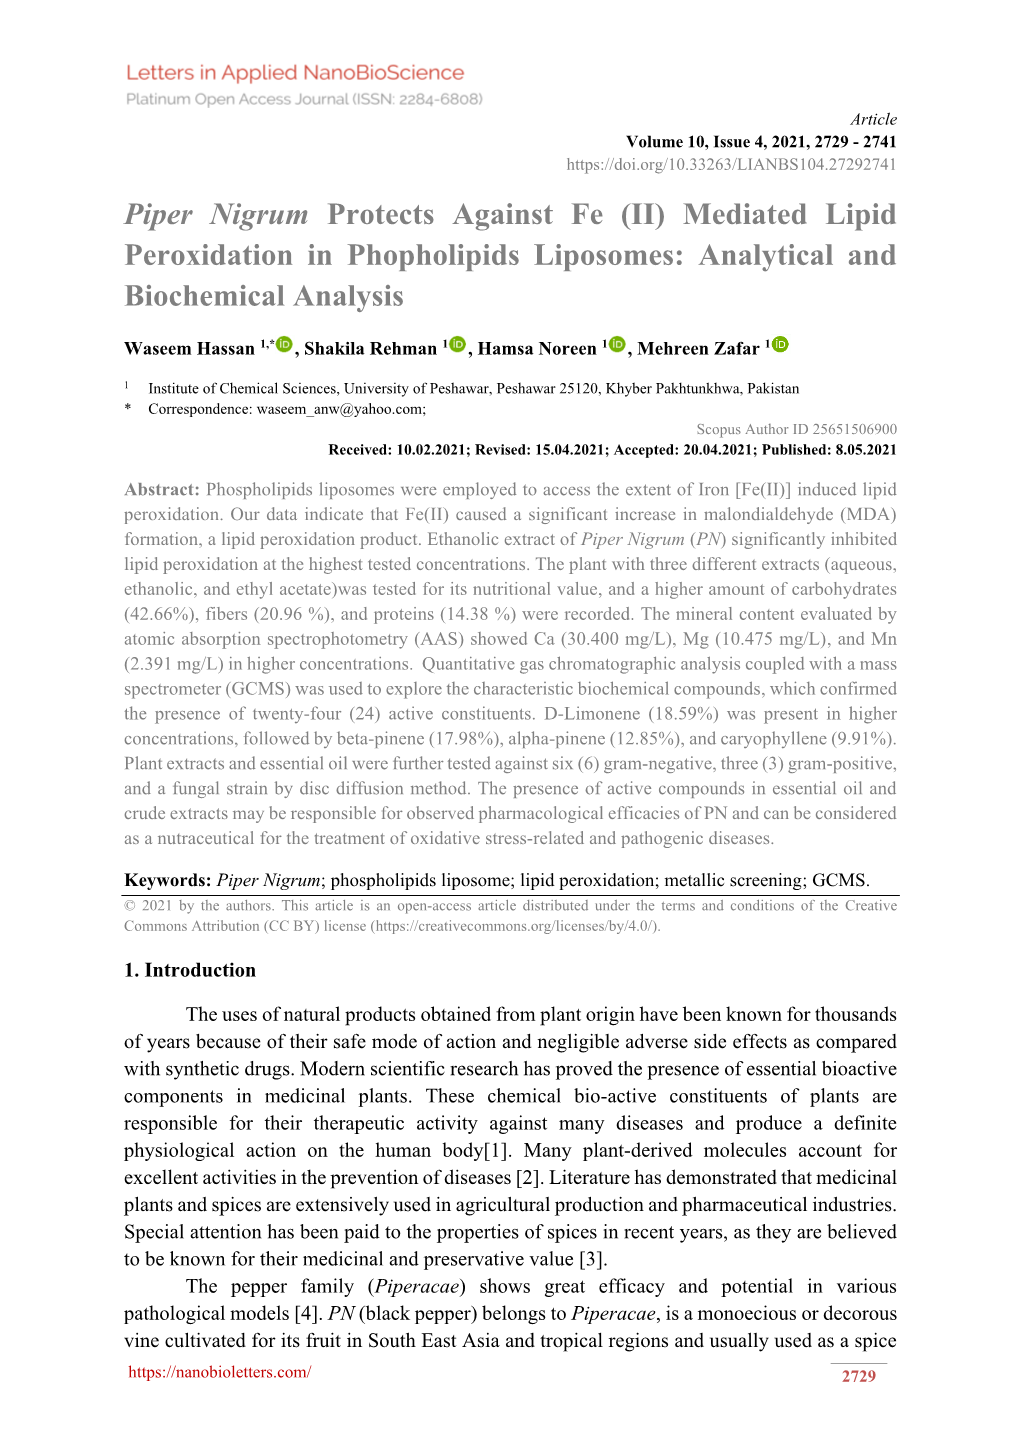 Piper Nigrum Protects Against Fe (II) Mediated Lipid Peroxidation in Phopholipids Liposomes: Analytical and Biochemical Analysis